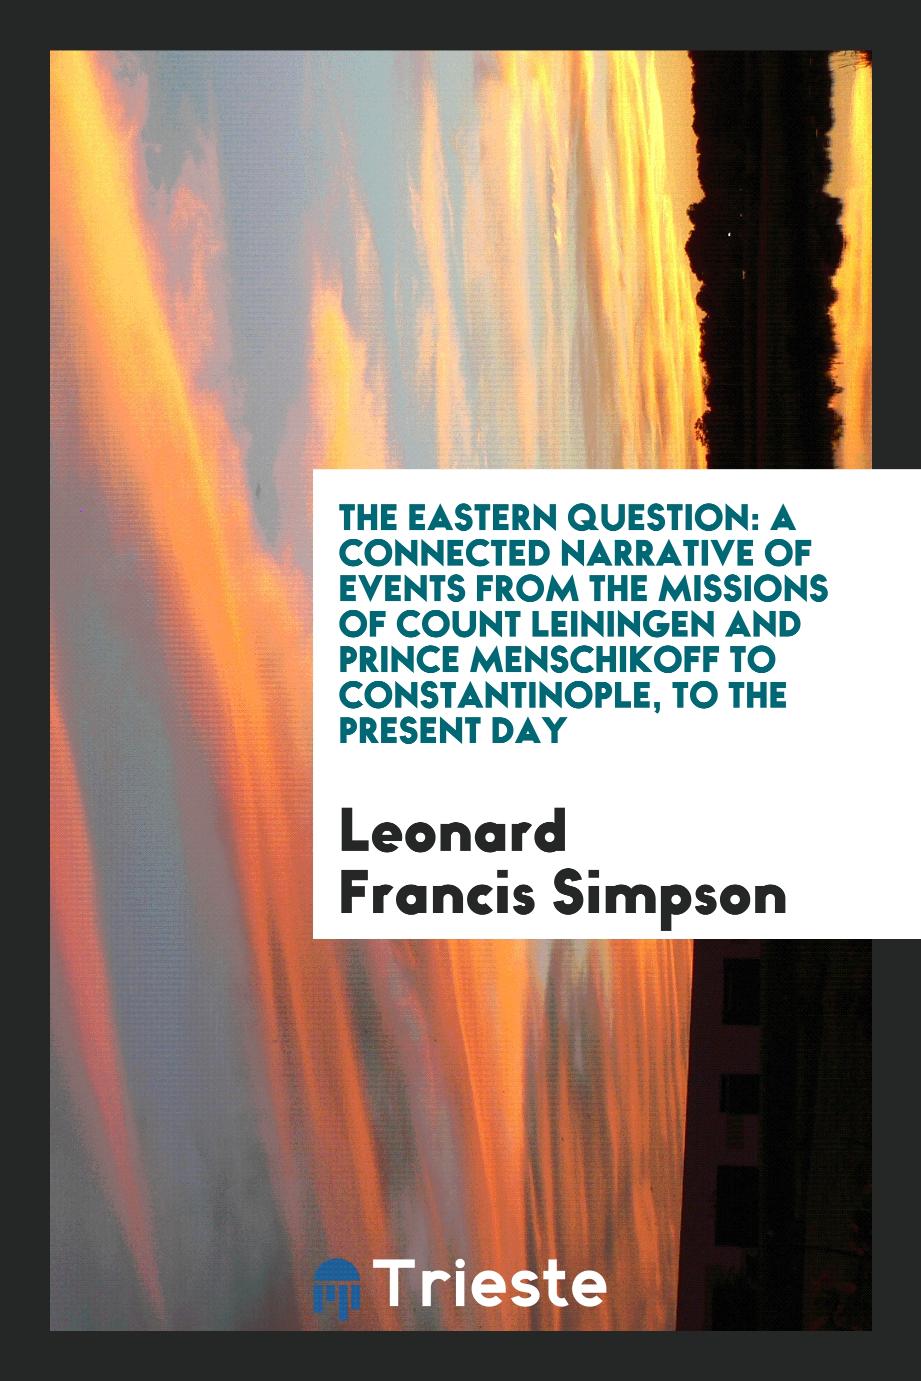 The Eastern Question: A Connected Narrative of Events from the Missions of Count Leiningen and Prince Menschikoff to Constantinople, to the Present Day